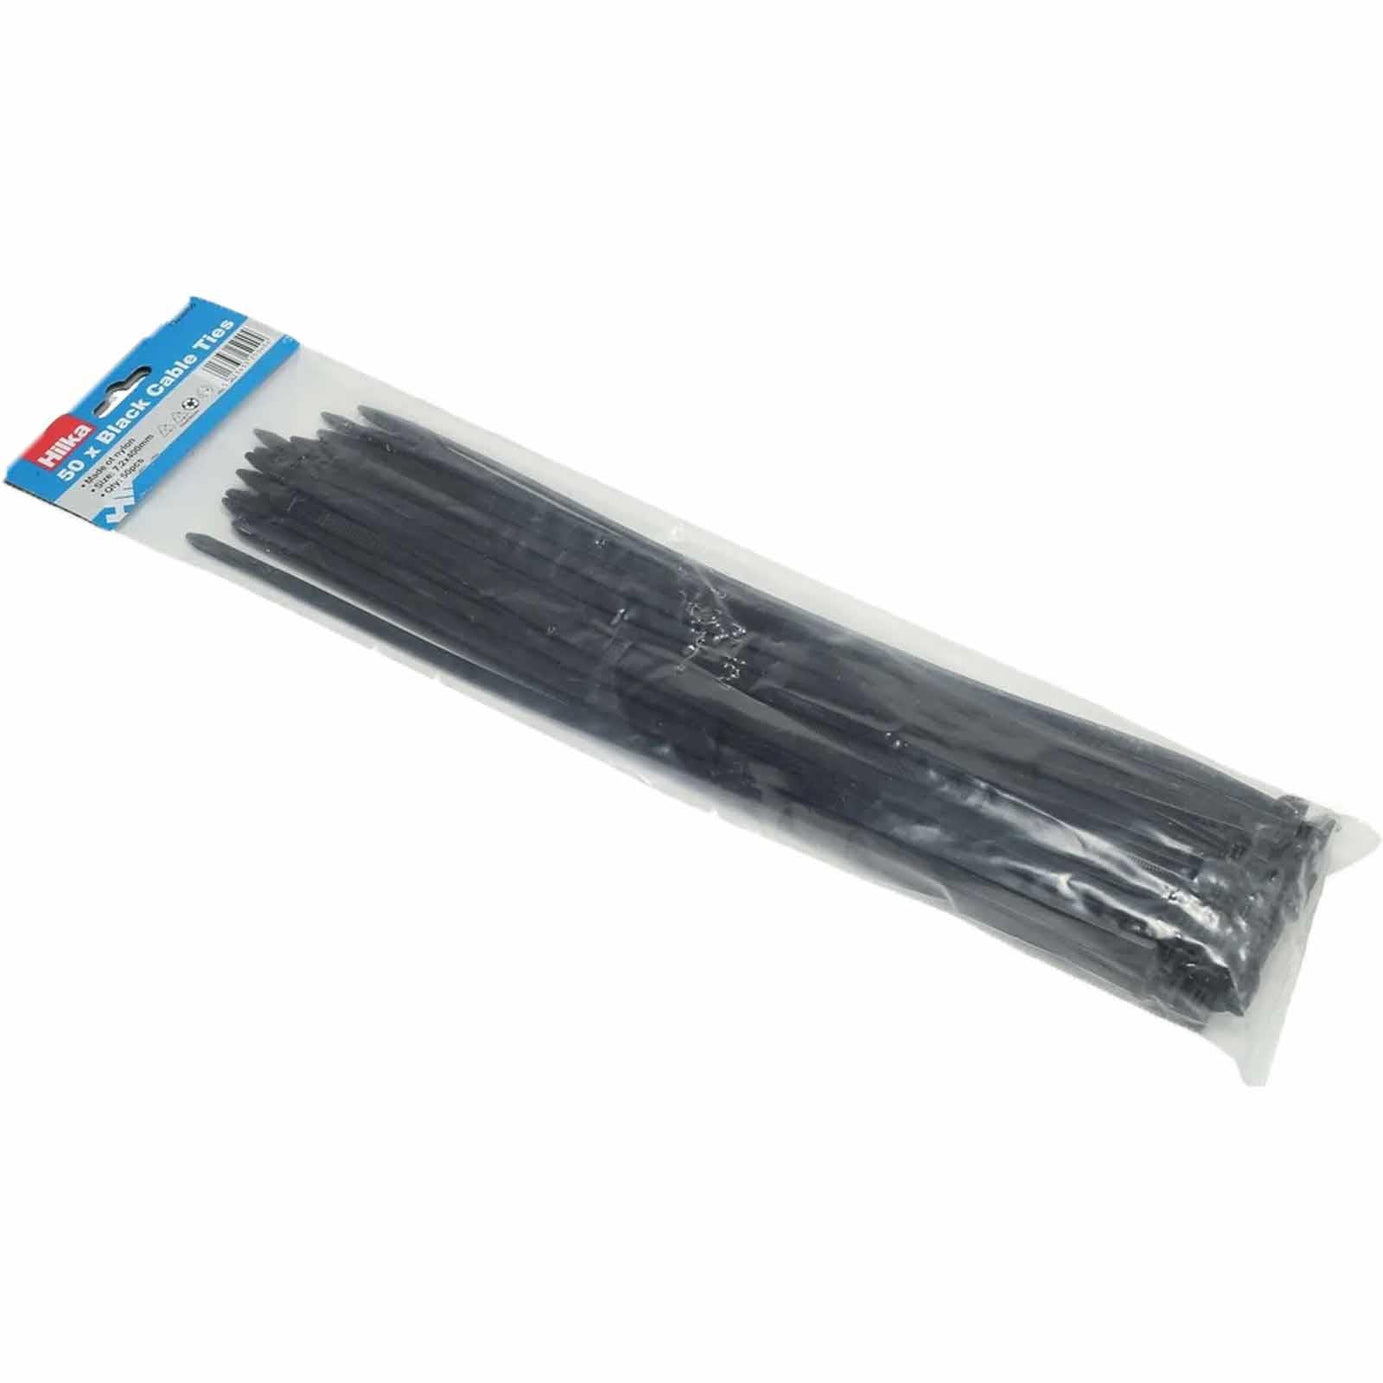 Hilka Cable Ties 7.2mm x 400mm